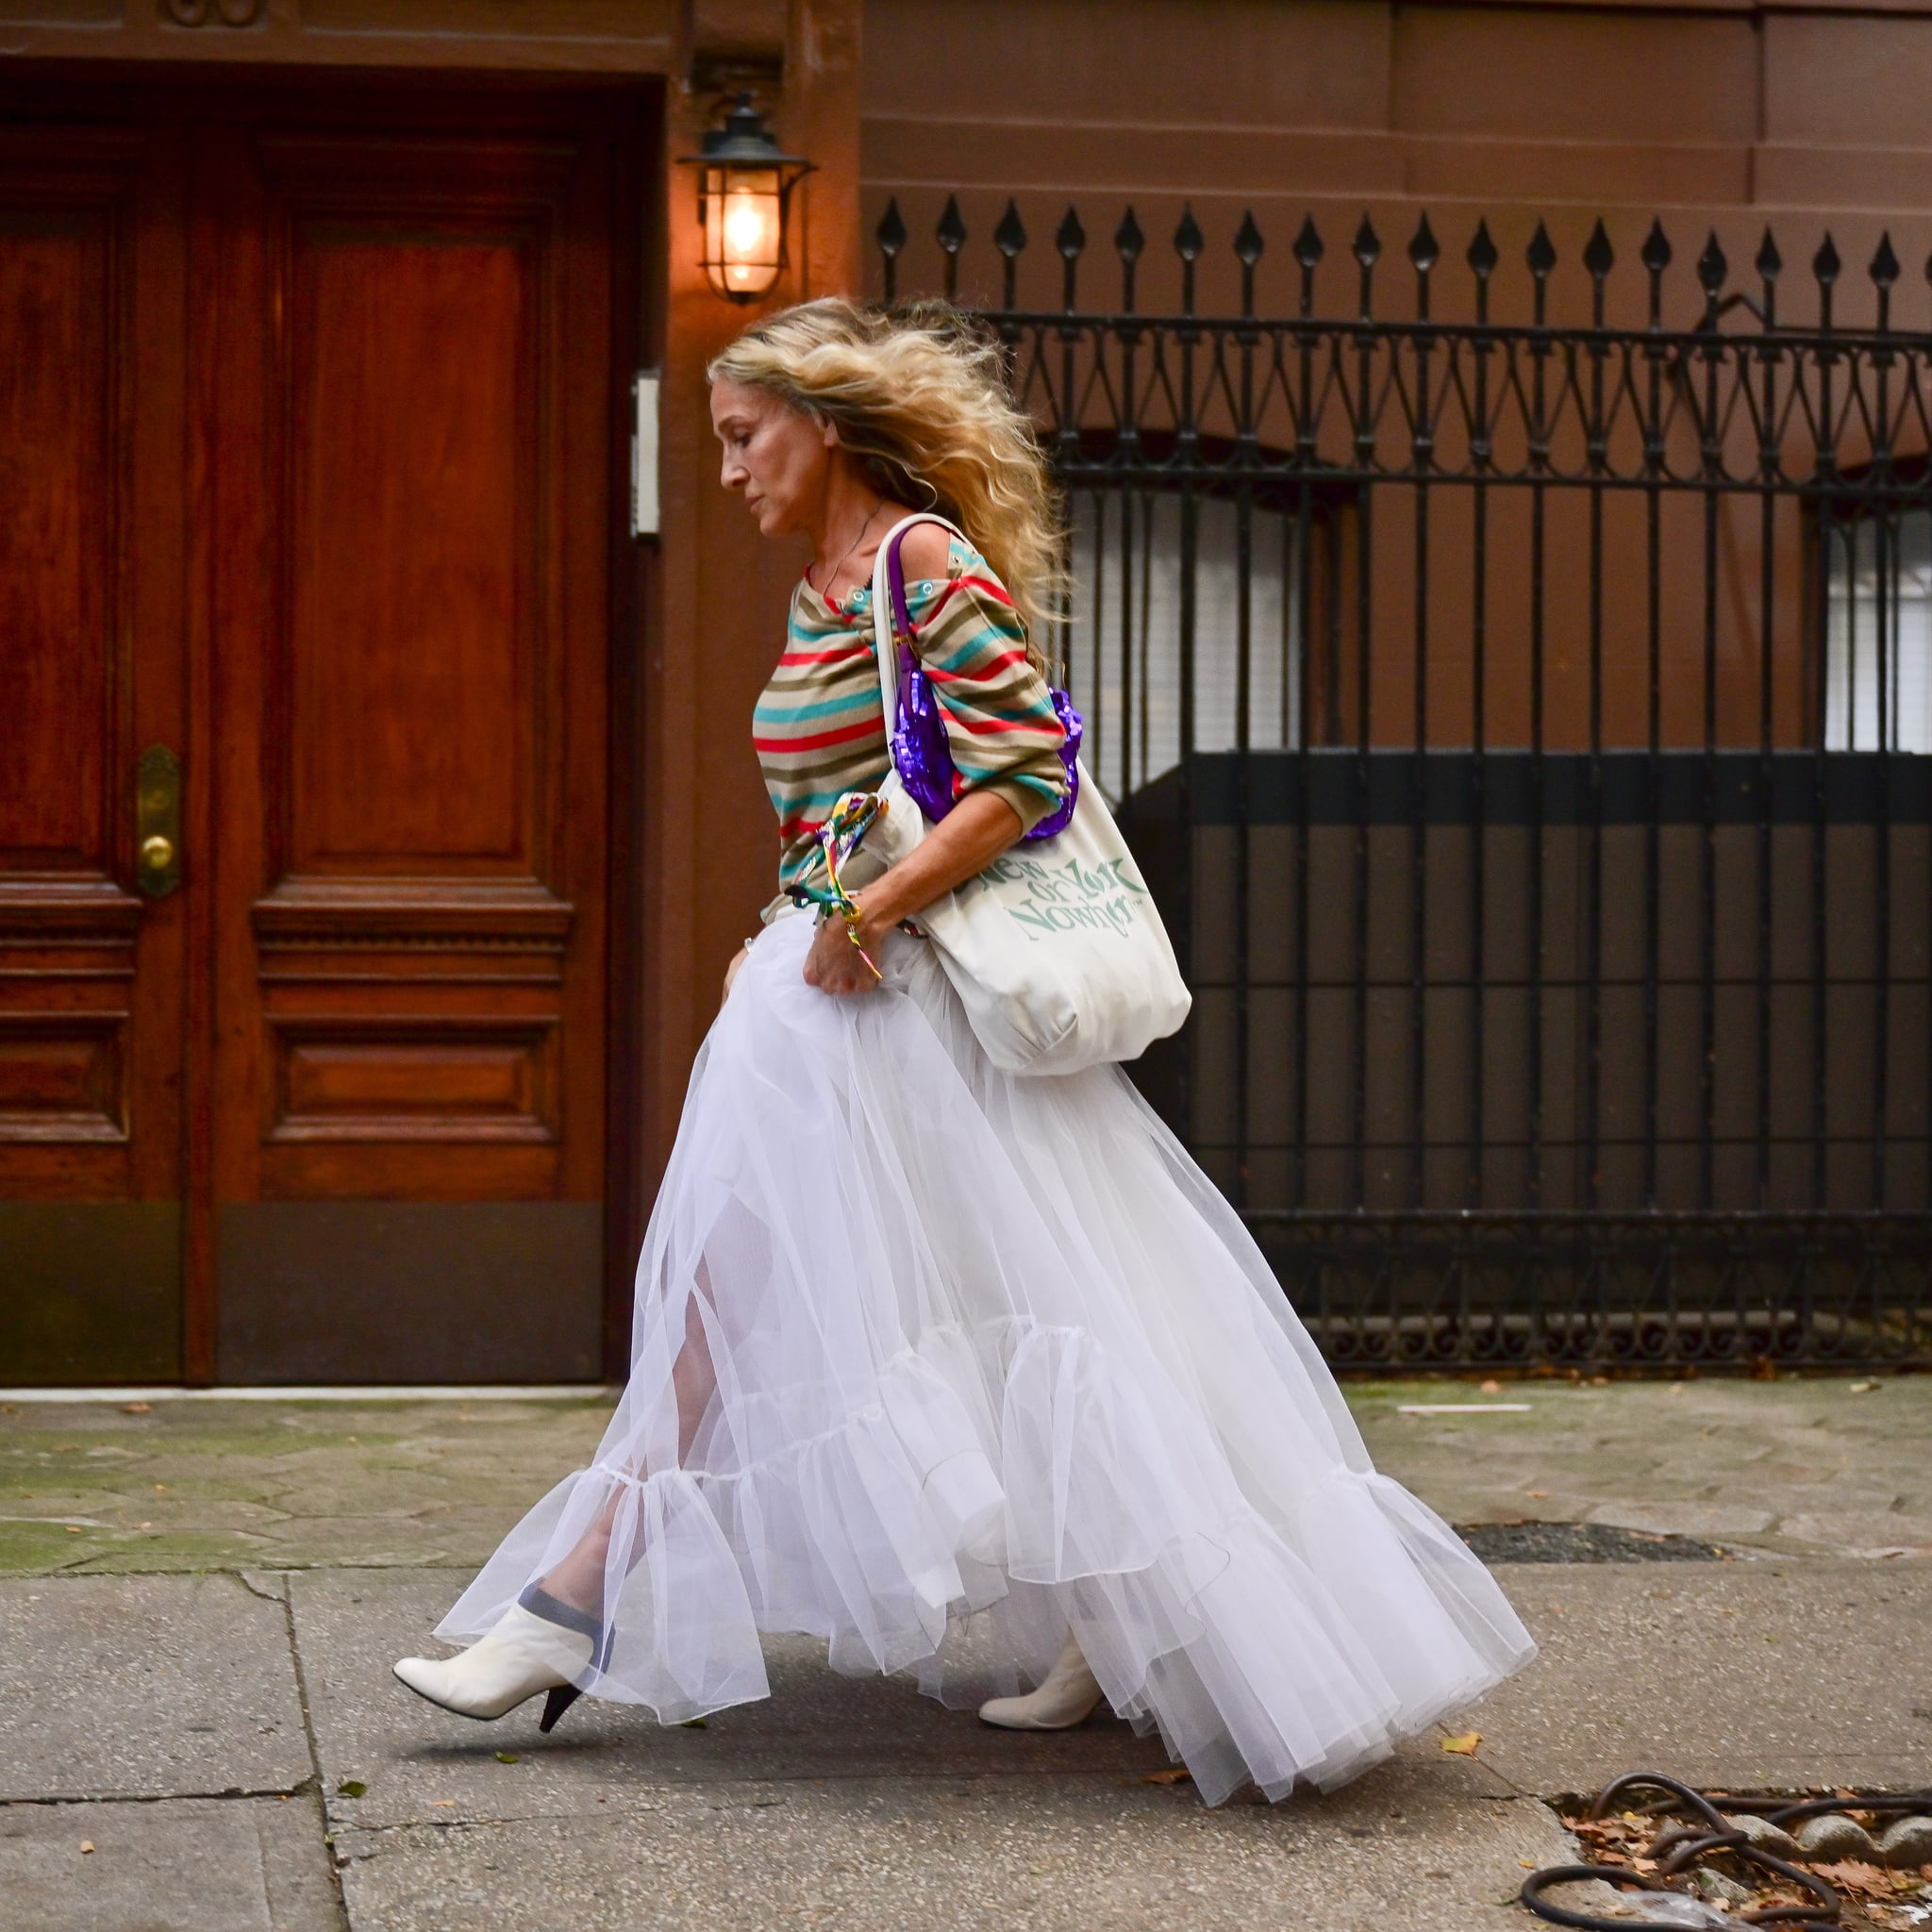 Shop Carrie Bradshaw's bags and 'baguettes' from Sex and the City